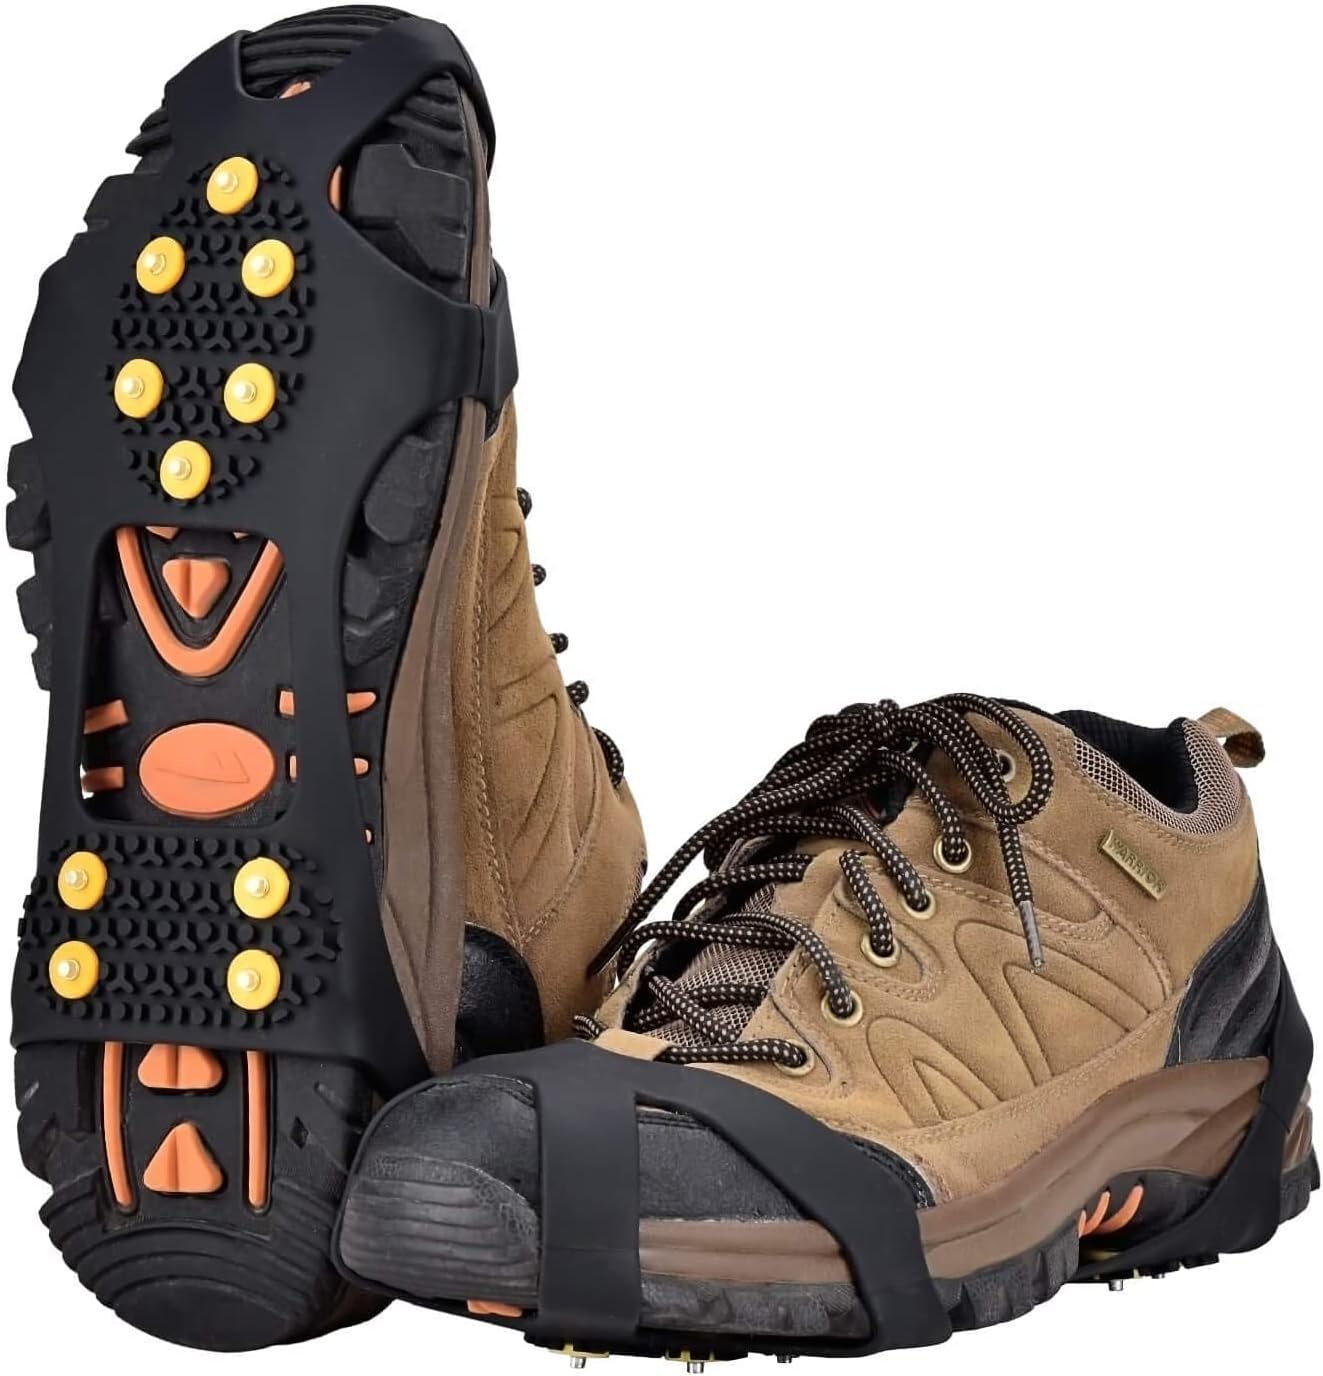 Aliglow Ice Snow Grips Over Shoe/Boot Traction Cleat [...]